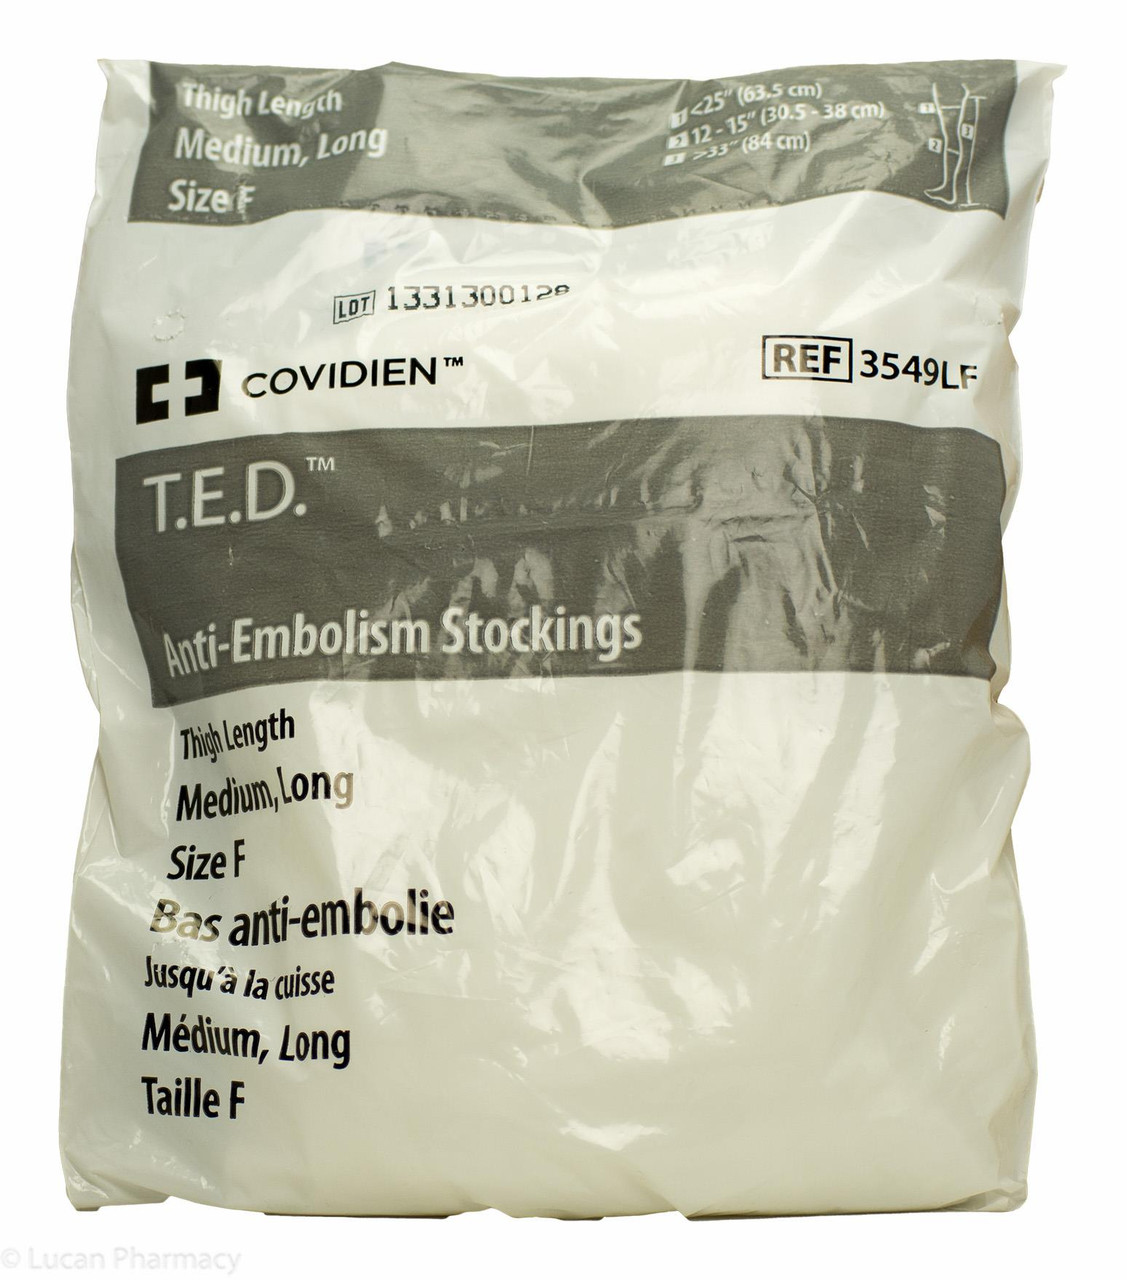 Ted Anti Embolism Size Chart